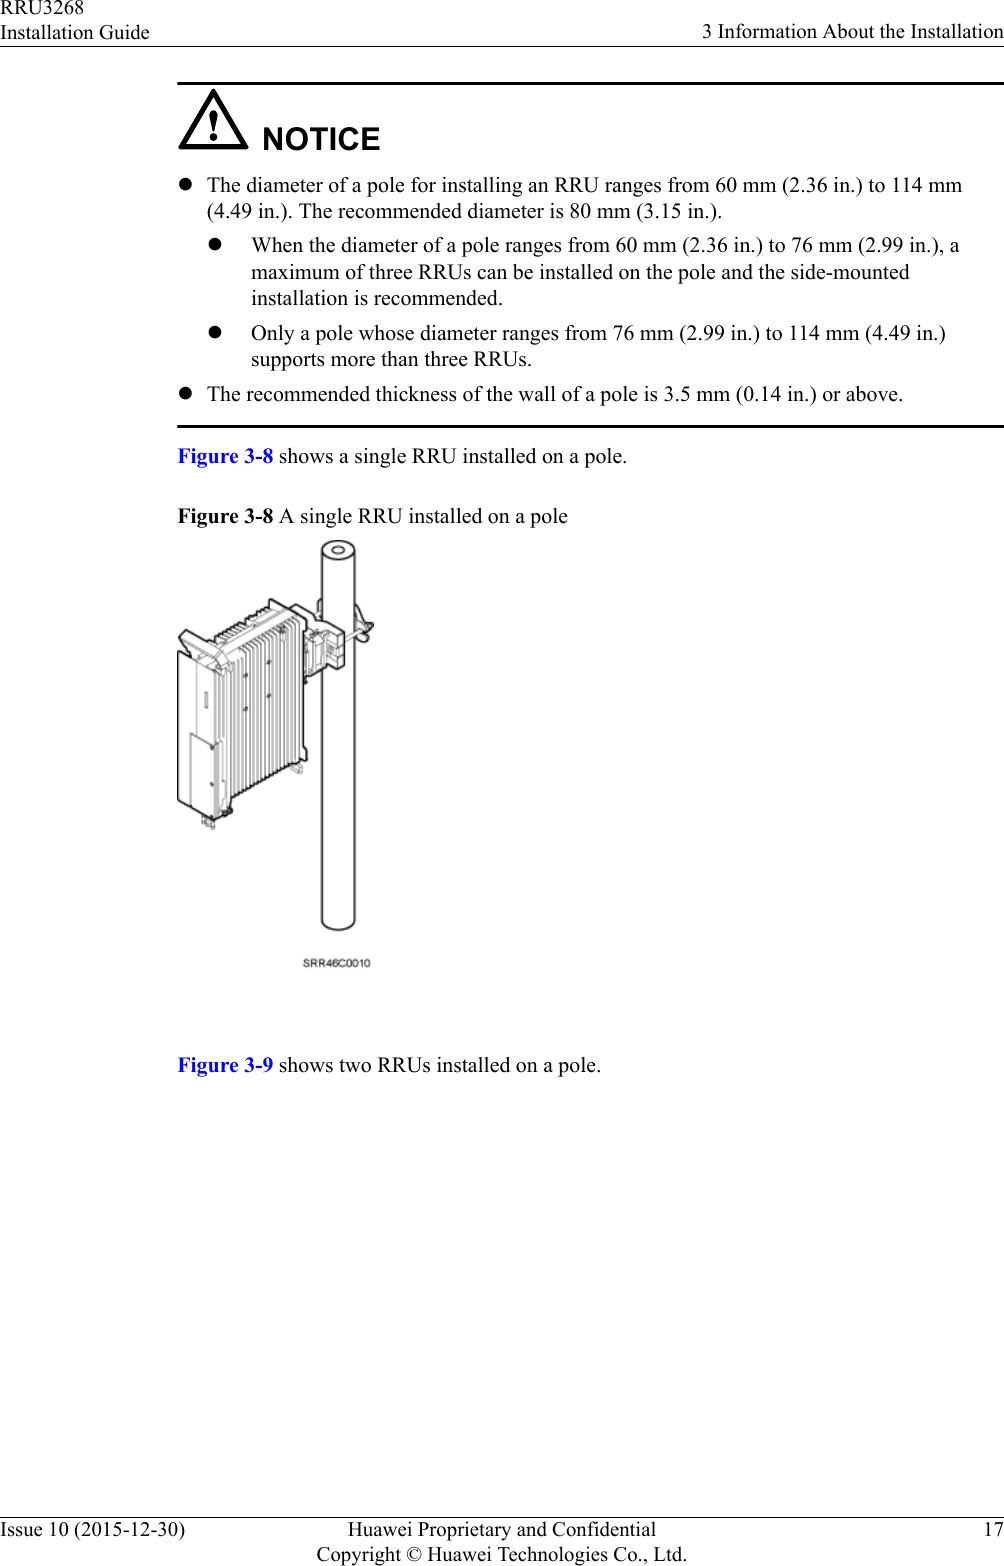 NOTICElThe diameter of a pole for installing an RRU ranges from 60 mm (2.36 in.) to 114 mm(4.49 in.). The recommended diameter is 80 mm (3.15 in.).lWhen the diameter of a pole ranges from 60 mm (2.36 in.) to 76 mm (2.99 in.), amaximum of three RRUs can be installed on the pole and the side-mountedinstallation is recommended.lOnly a pole whose diameter ranges from 76 mm (2.99 in.) to 114 mm (4.49 in.)supports more than three RRUs.lThe recommended thickness of the wall of a pole is 3.5 mm (0.14 in.) or above.Figure 3-8 shows a single RRU installed on a pole.Figure 3-8 A single RRU installed on a pole Figure 3-9 shows two RRUs installed on a pole.RRU3268Installation Guide 3 Information About the InstallationIssue 10 (2015-12-30) Huawei Proprietary and ConfidentialCopyright © Huawei Technologies Co., Ltd.17